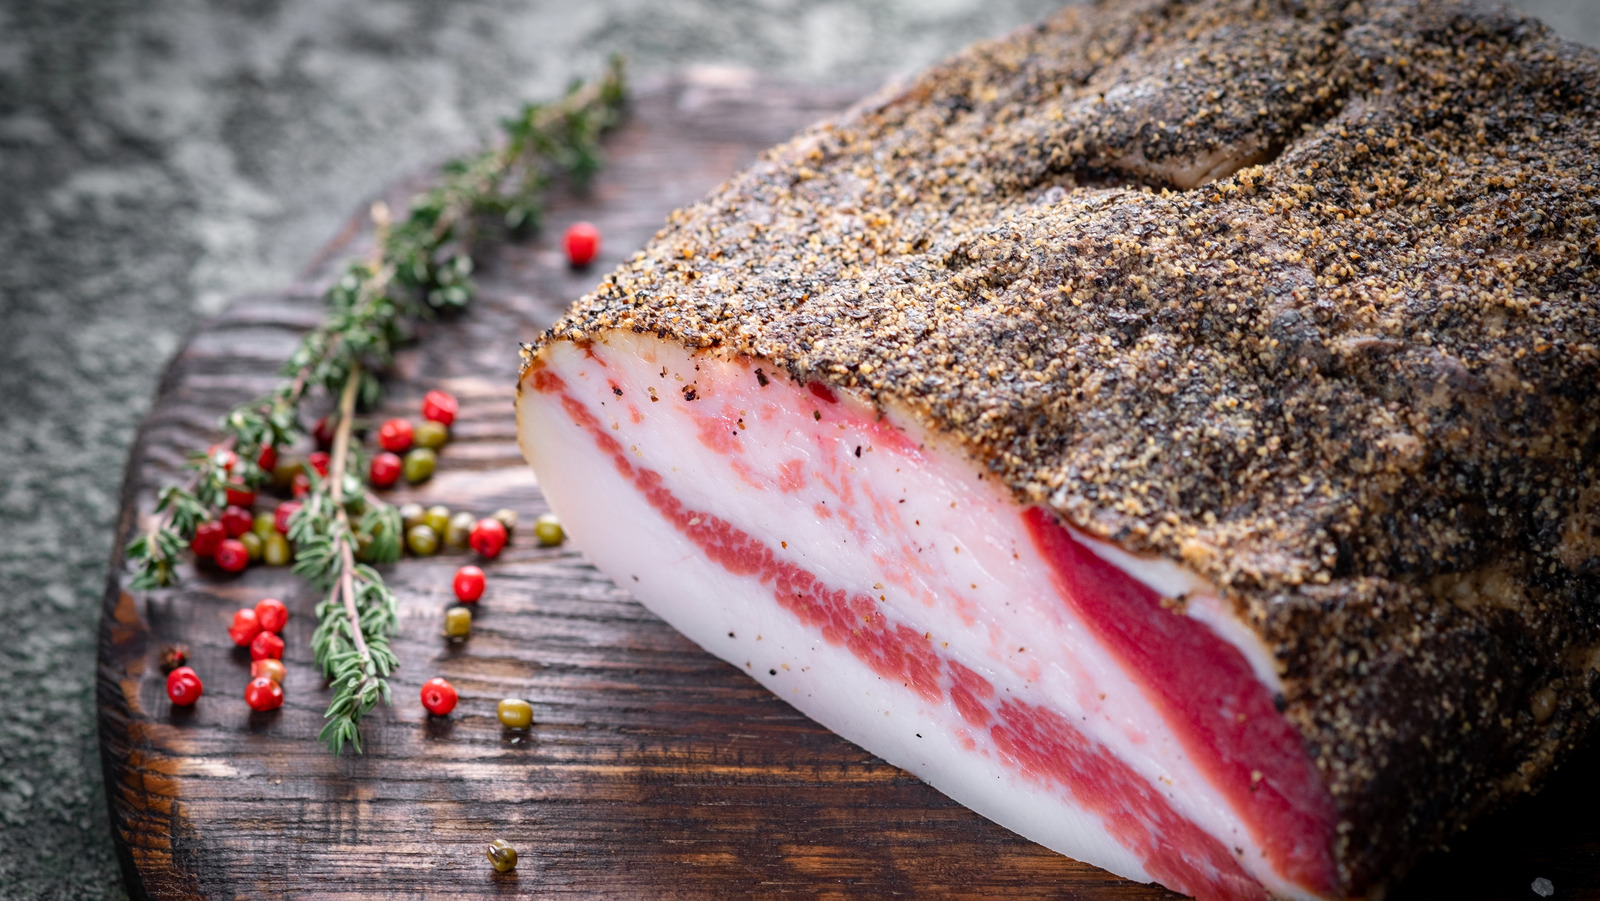 What Is Guanciale And Why Is It So Expensive?